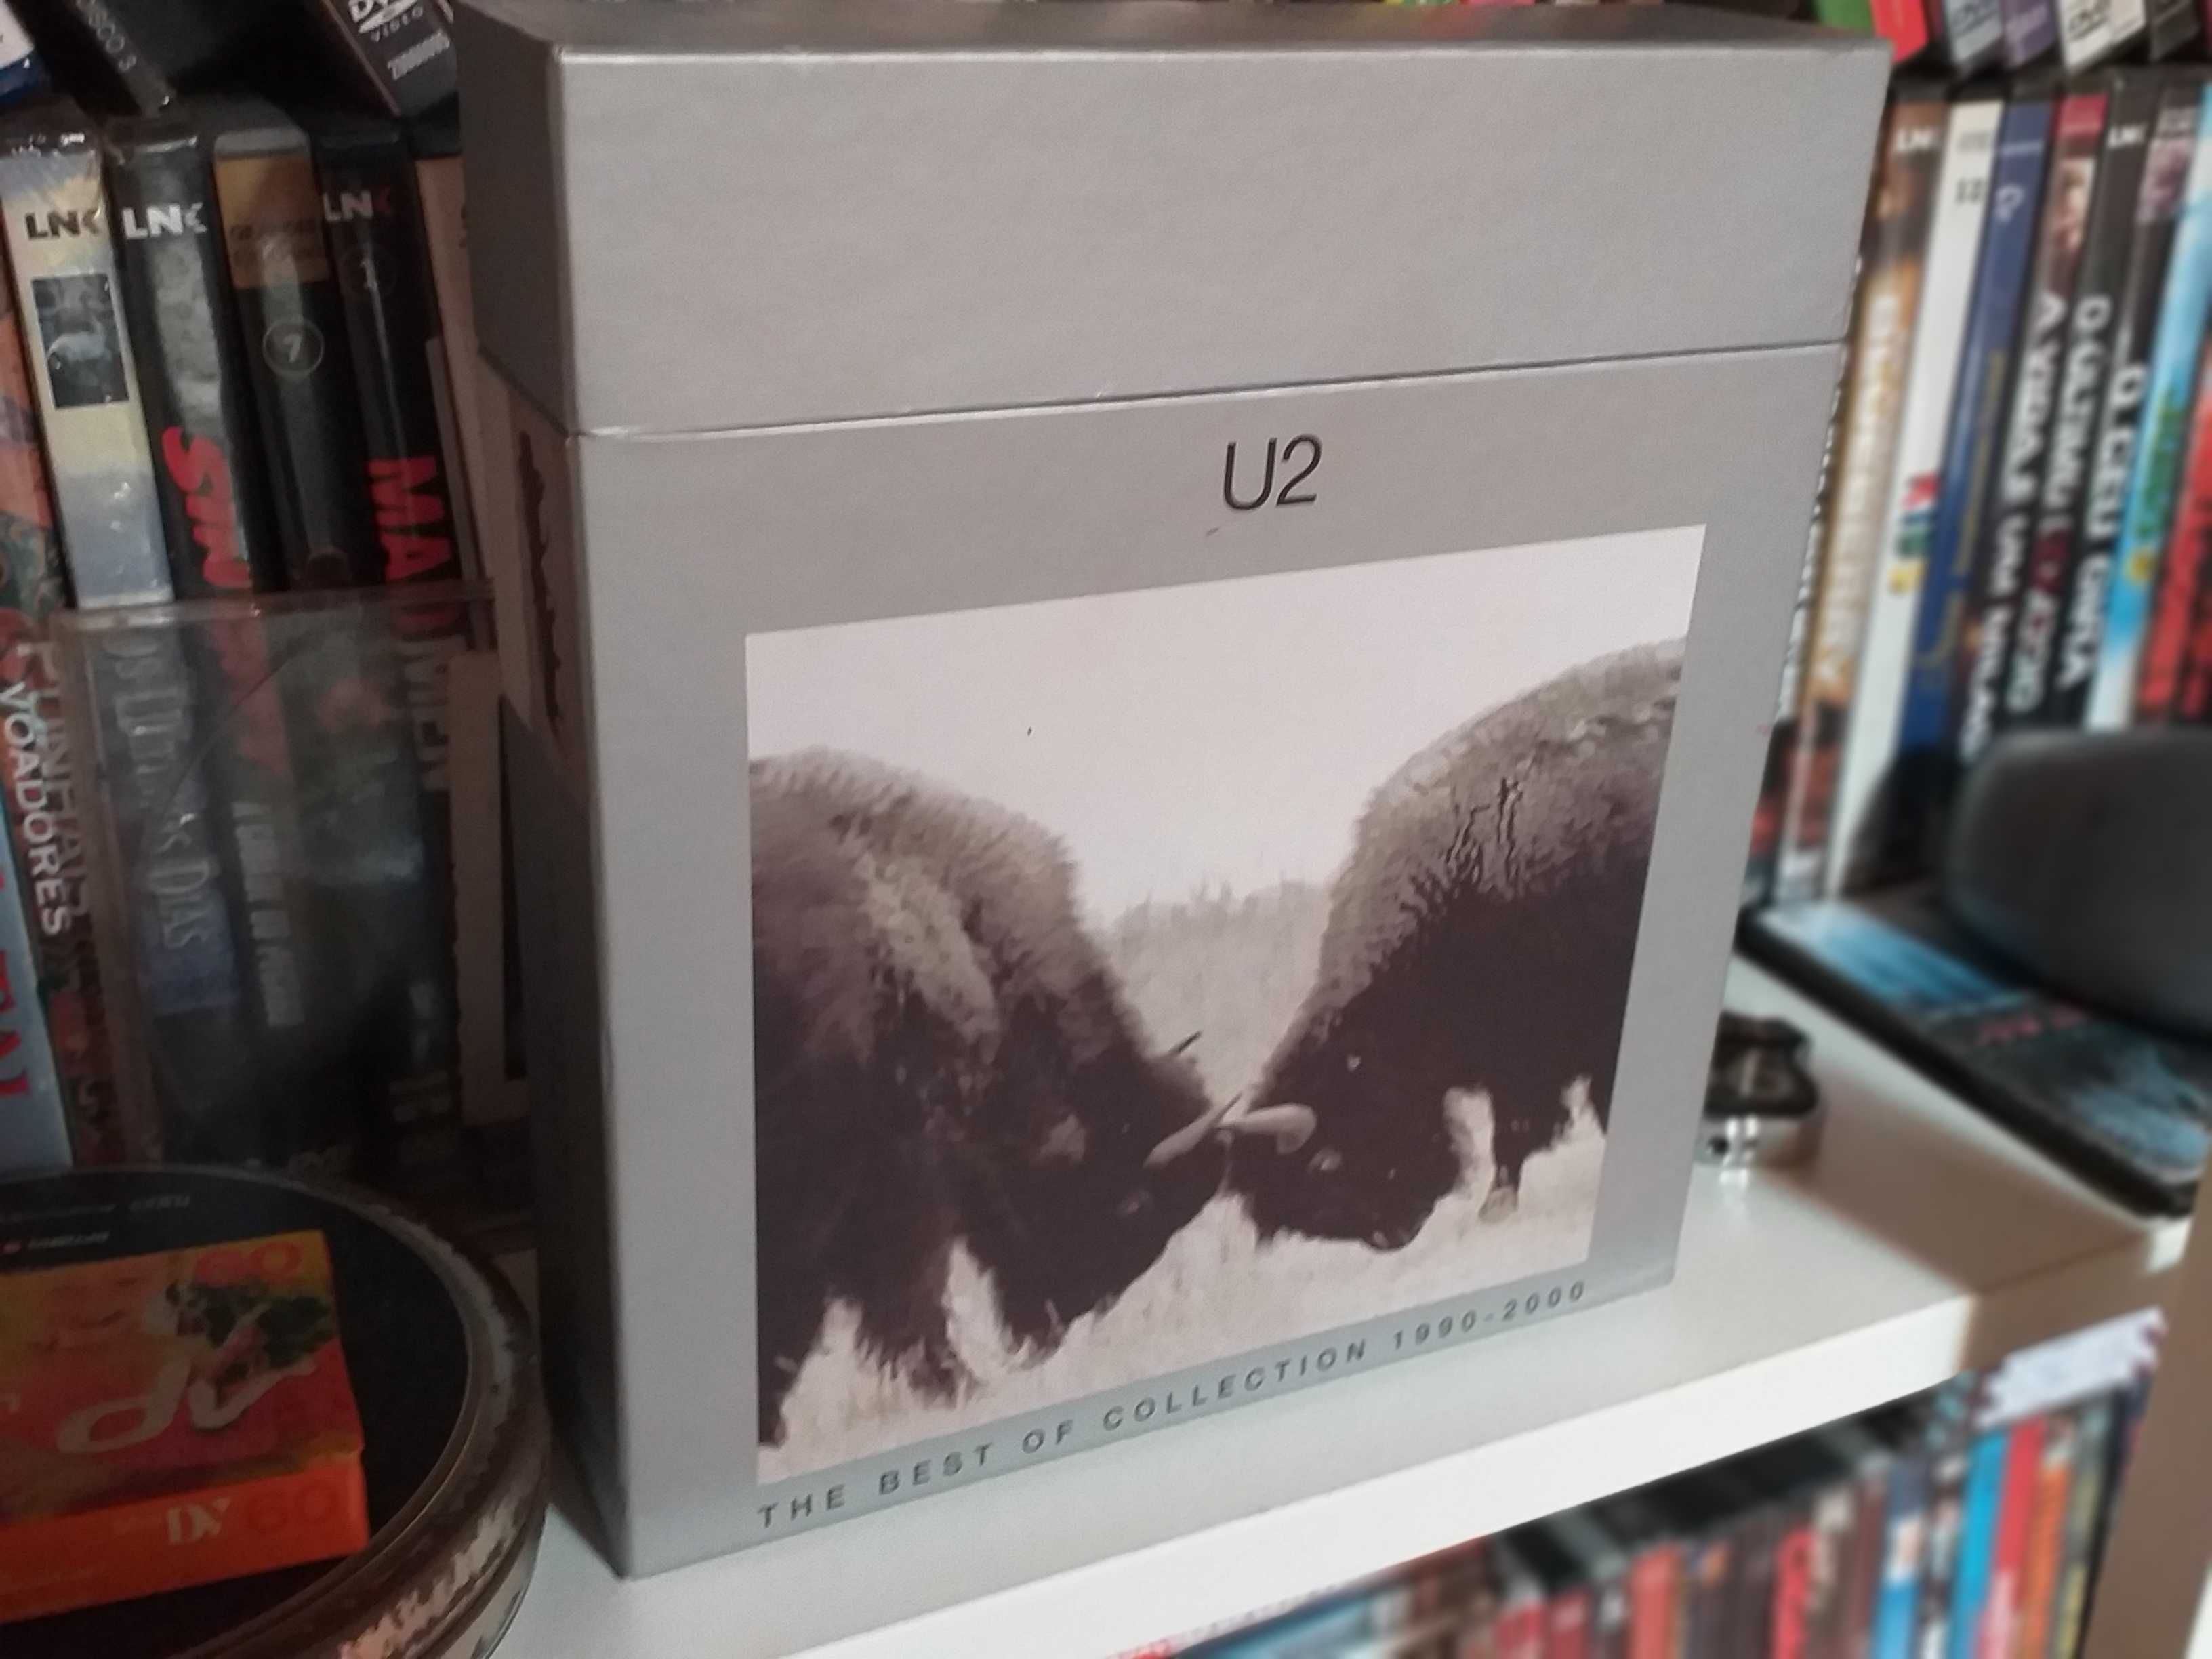 U2 THE BEST OF COLLECTION 15 singles 7 "